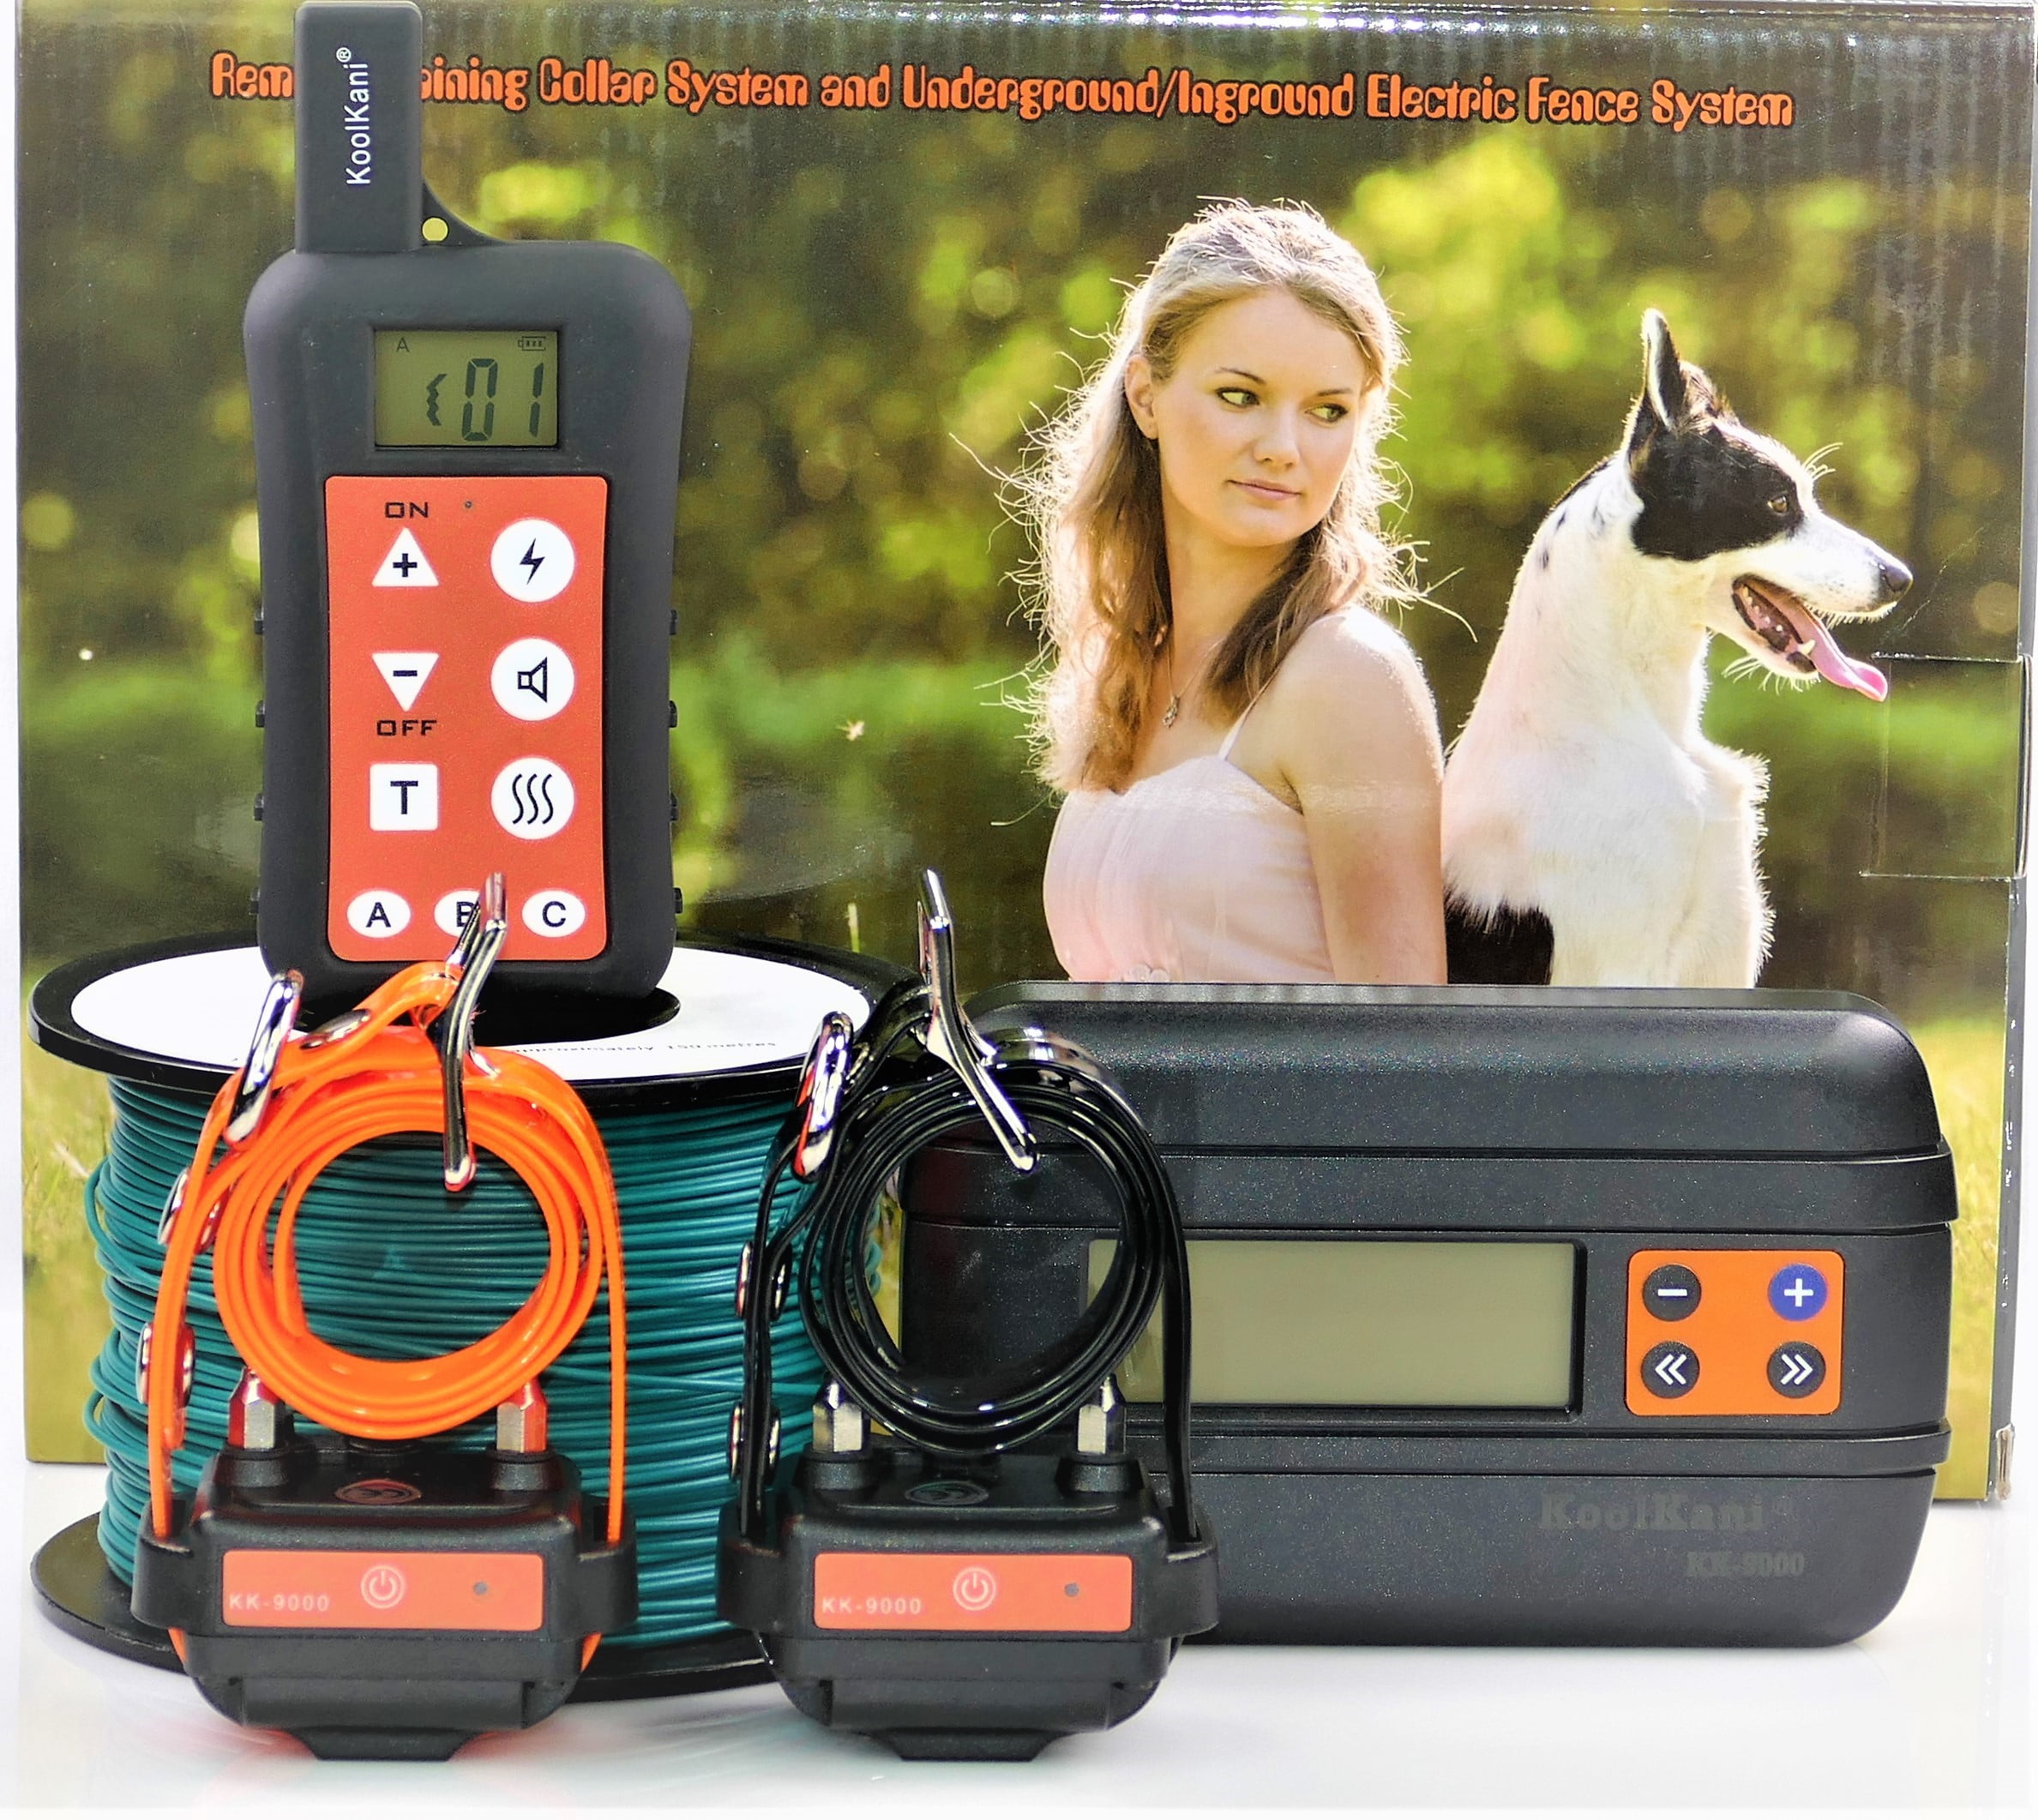 Underground Electric Dog Fence System 1/2/3 Water Resistant Shock Collars